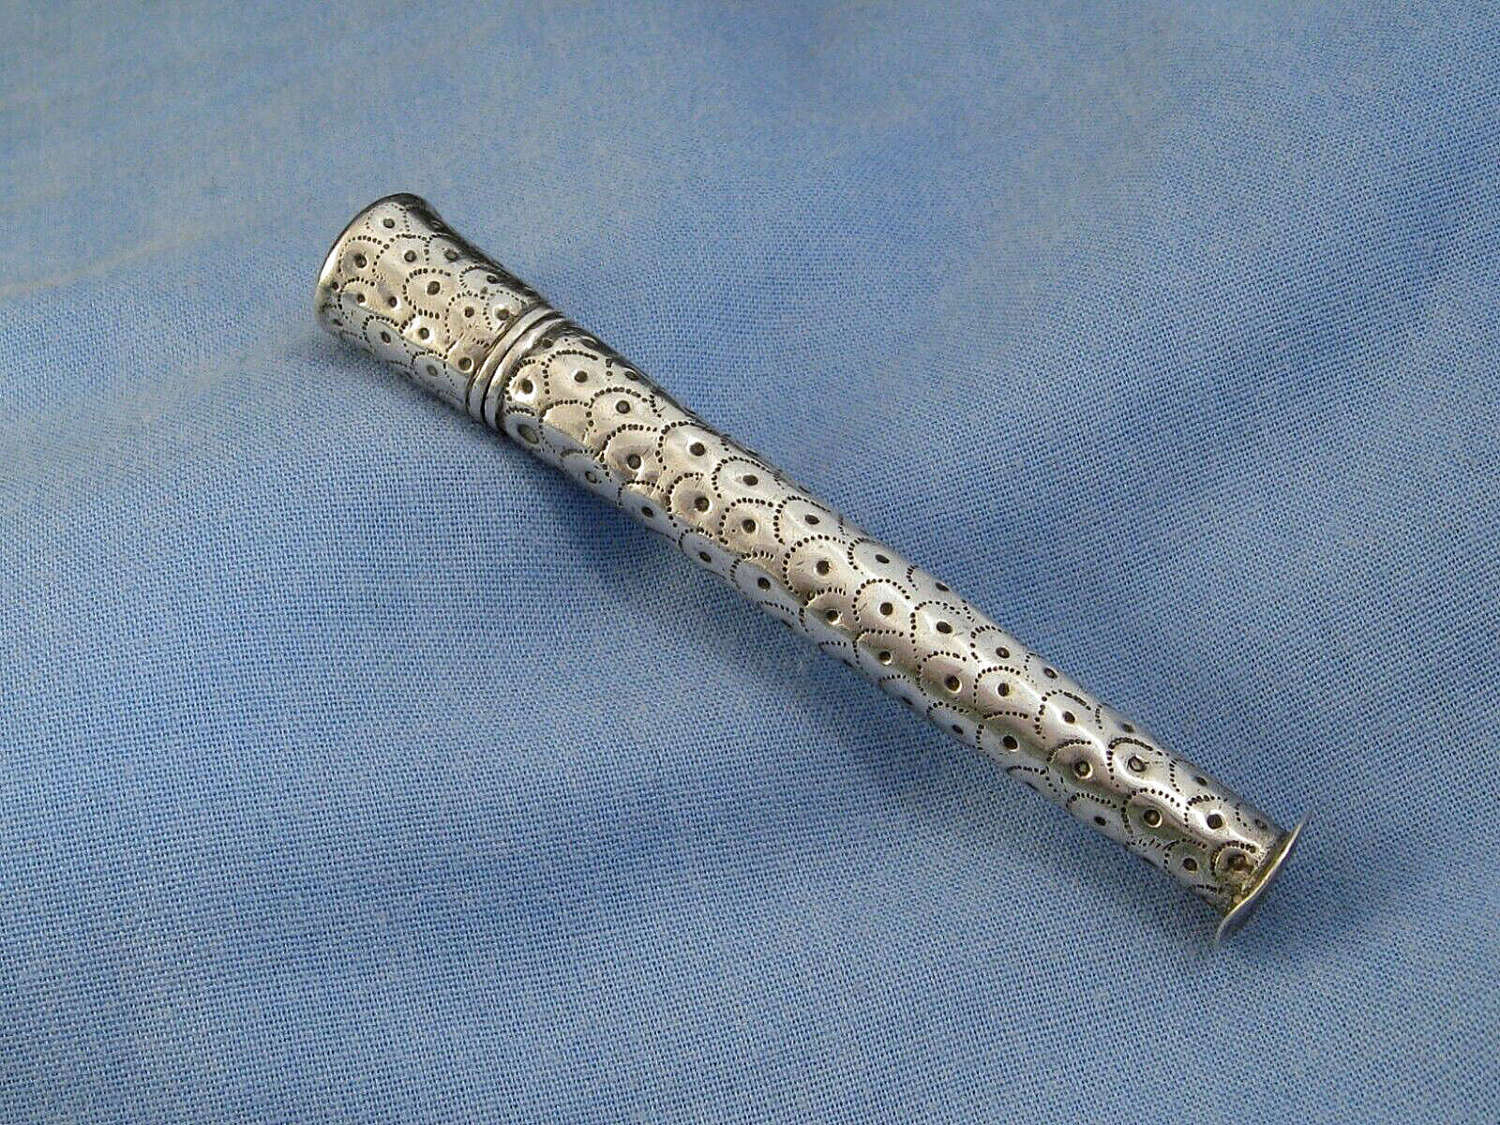 Antique 18thc Metalware Silver Needlecase With Fish Scale Pattern.